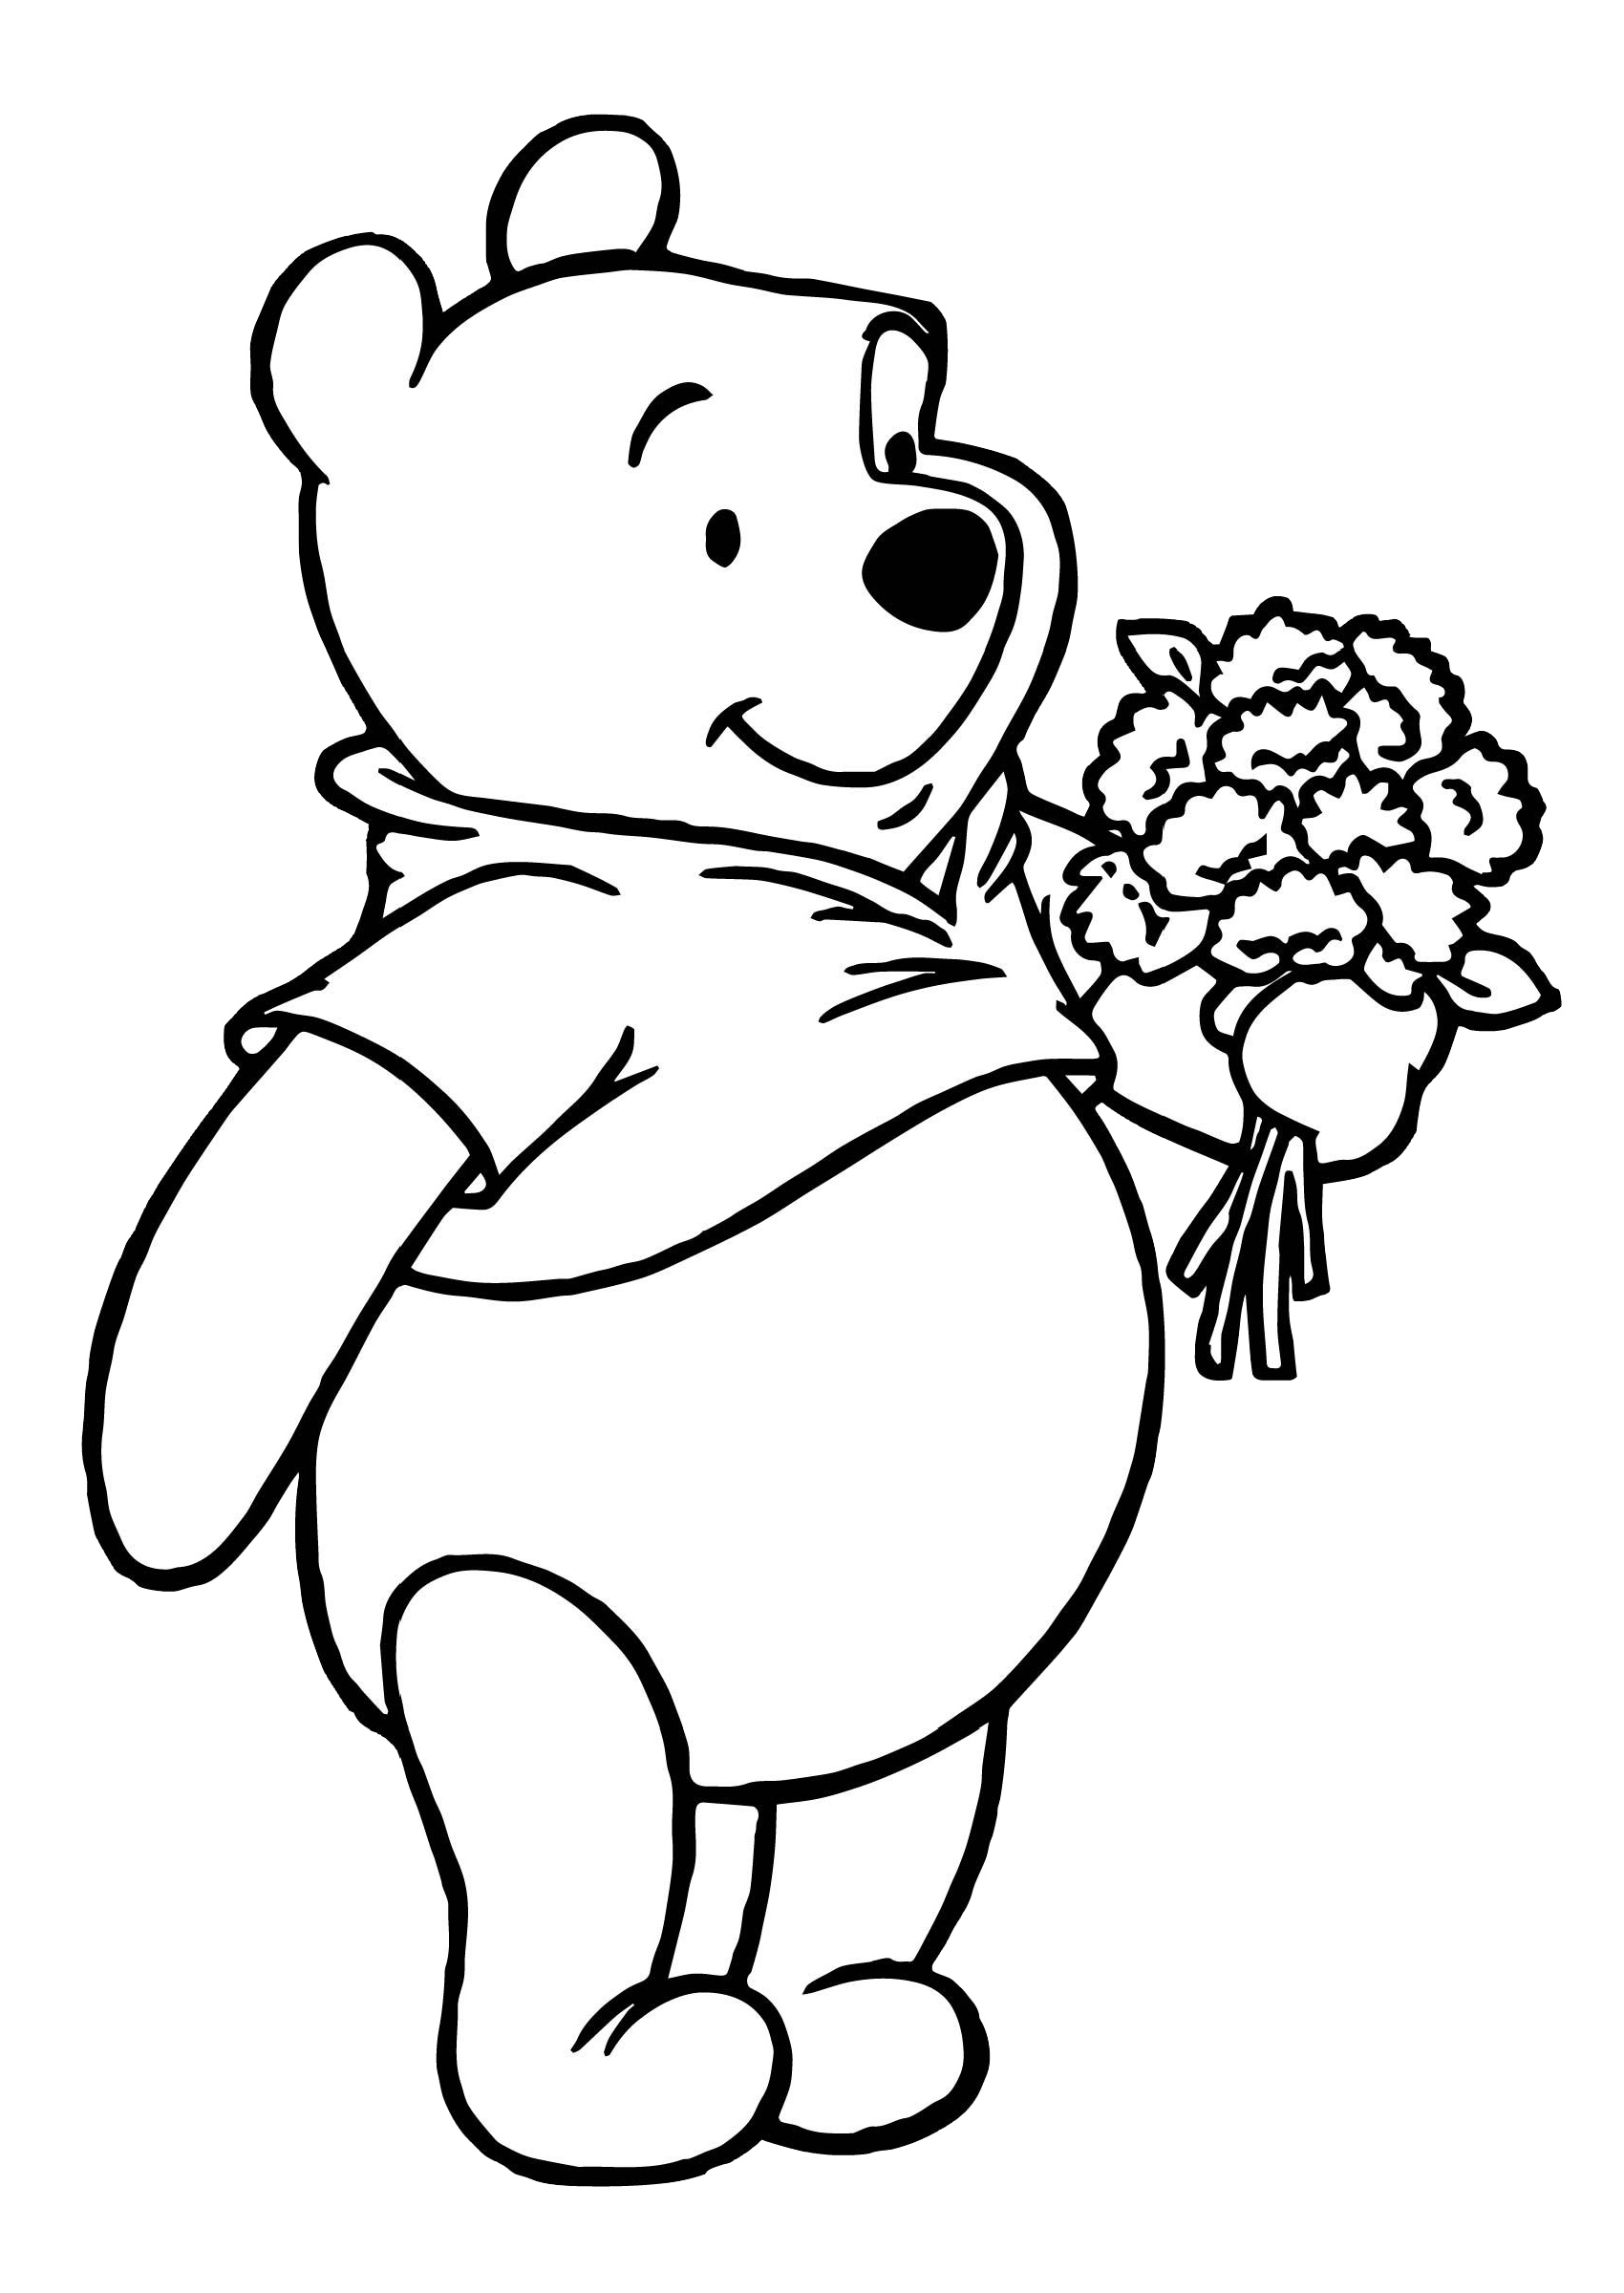 winnie-the-pooh-easy-drawings-drawings-coloring-pages-the-best-porn